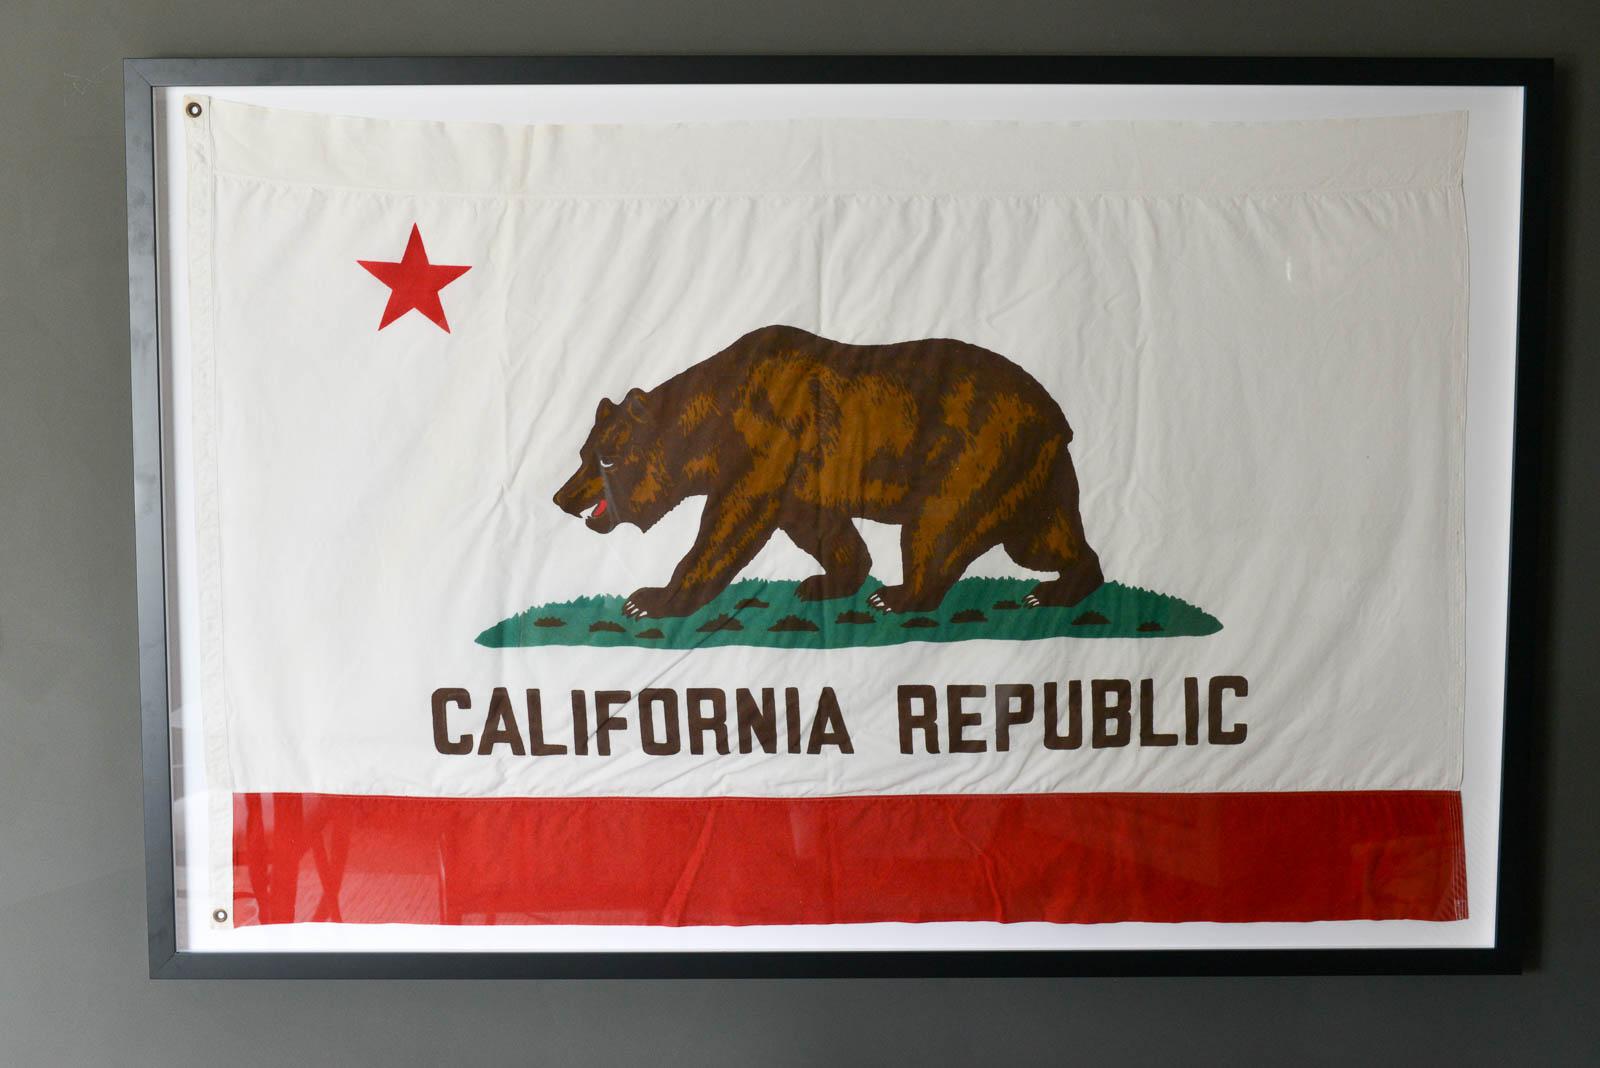 Vintage Fabric California State Bear flag. Professionally framed with acrylic plexiglass and thick wood frame. Flag is circa 1970 in excellent original condition. The flag is very large, framed this piece measures 78